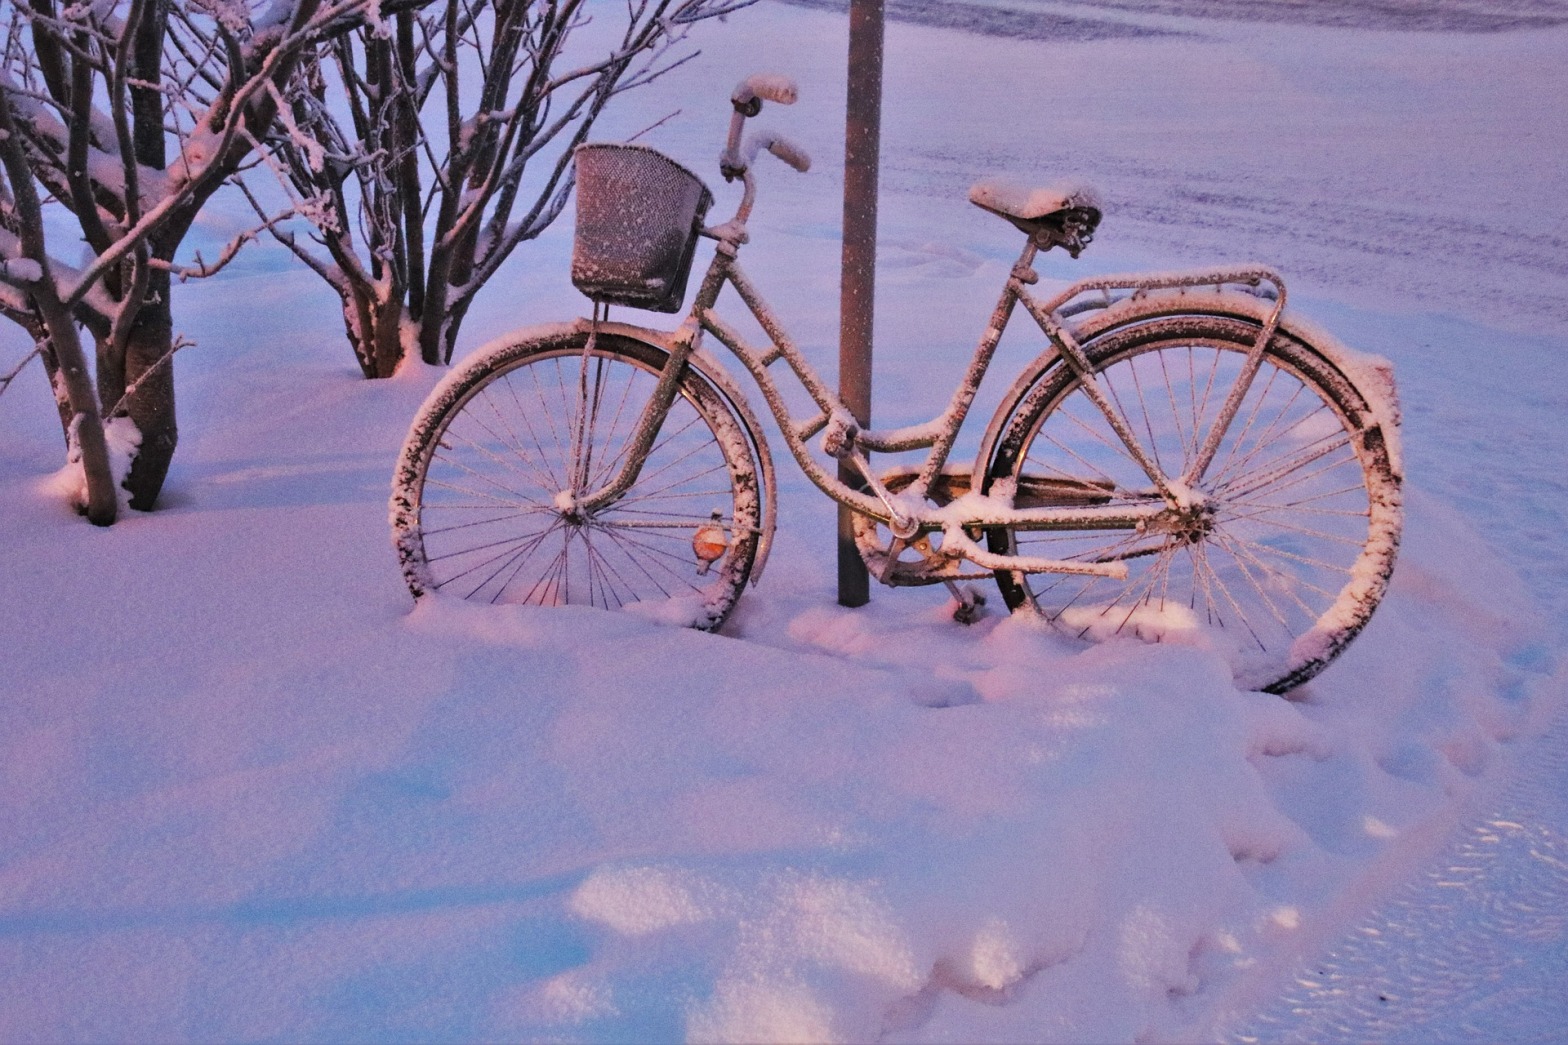 Old bicycle leaning against a pole in snow